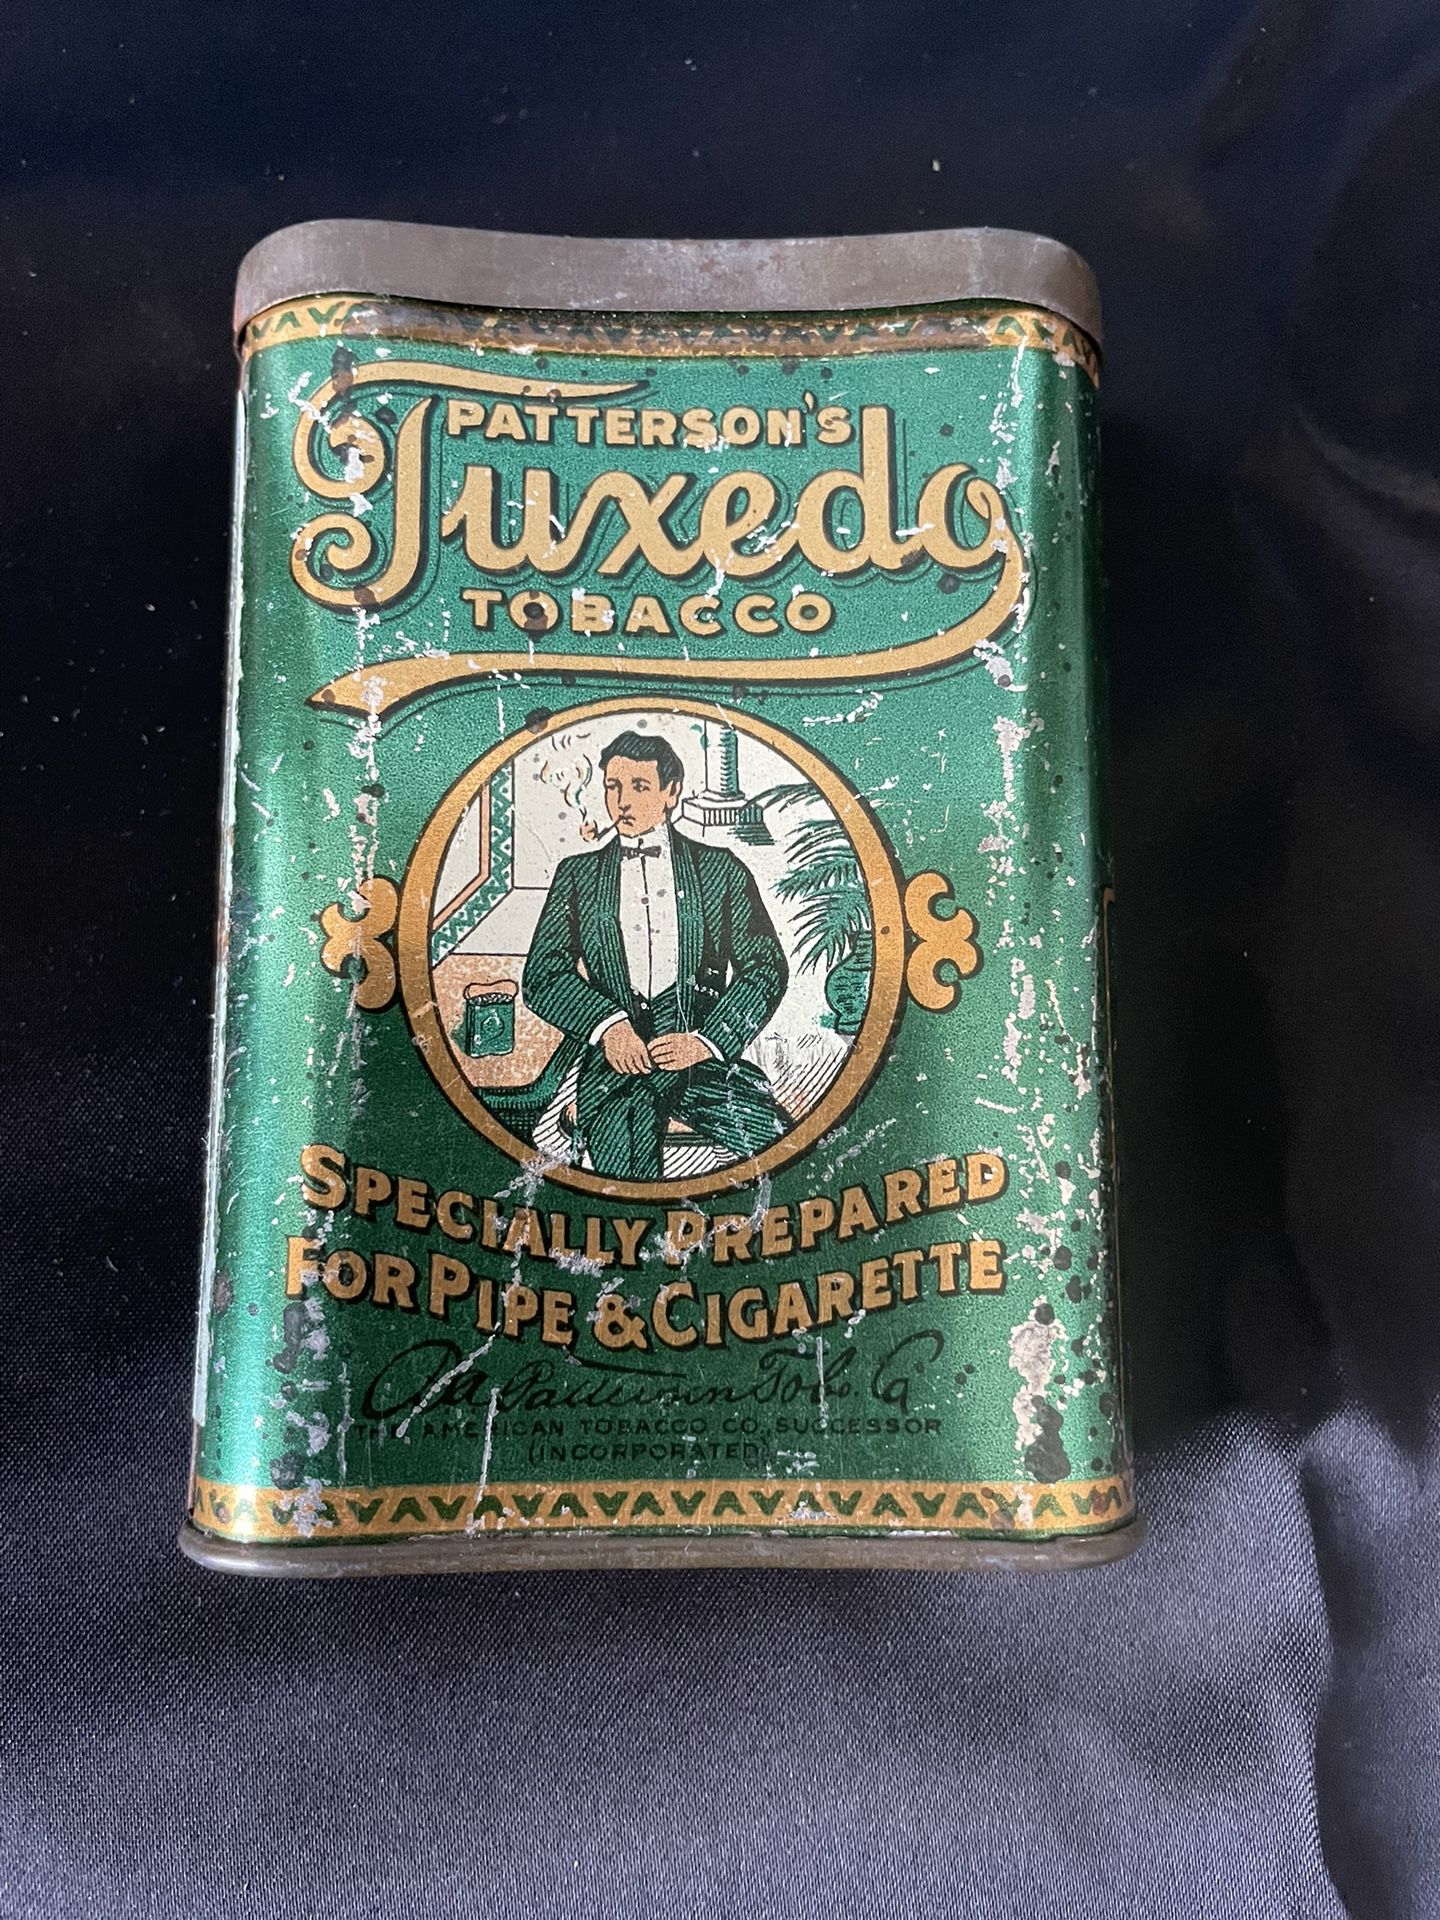 Patterson's Tuxedo Tobacco Tin Canister.